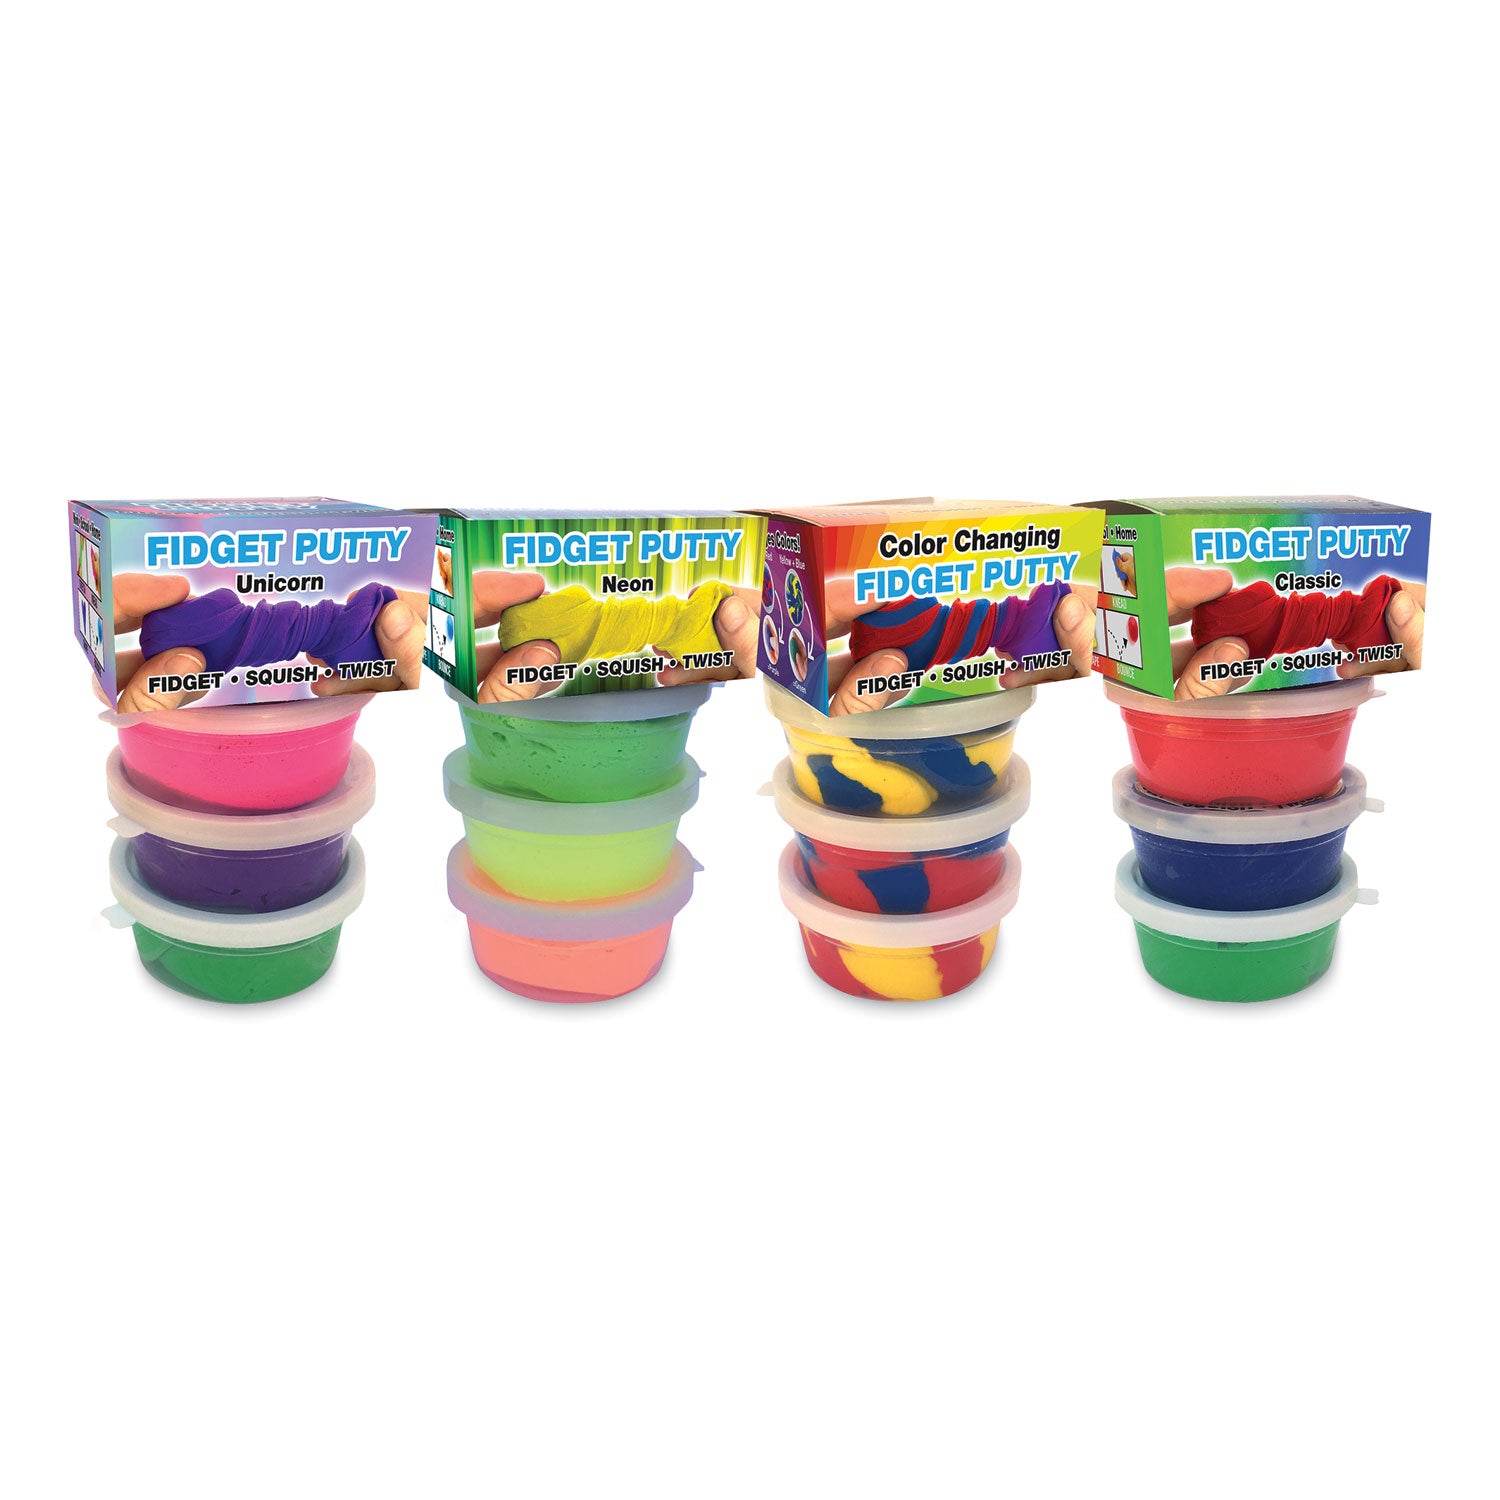 fidget-putty-activity-set-random-color-and-theme-assortment-ages-5-and-up-3-pack_zor2922 - 1